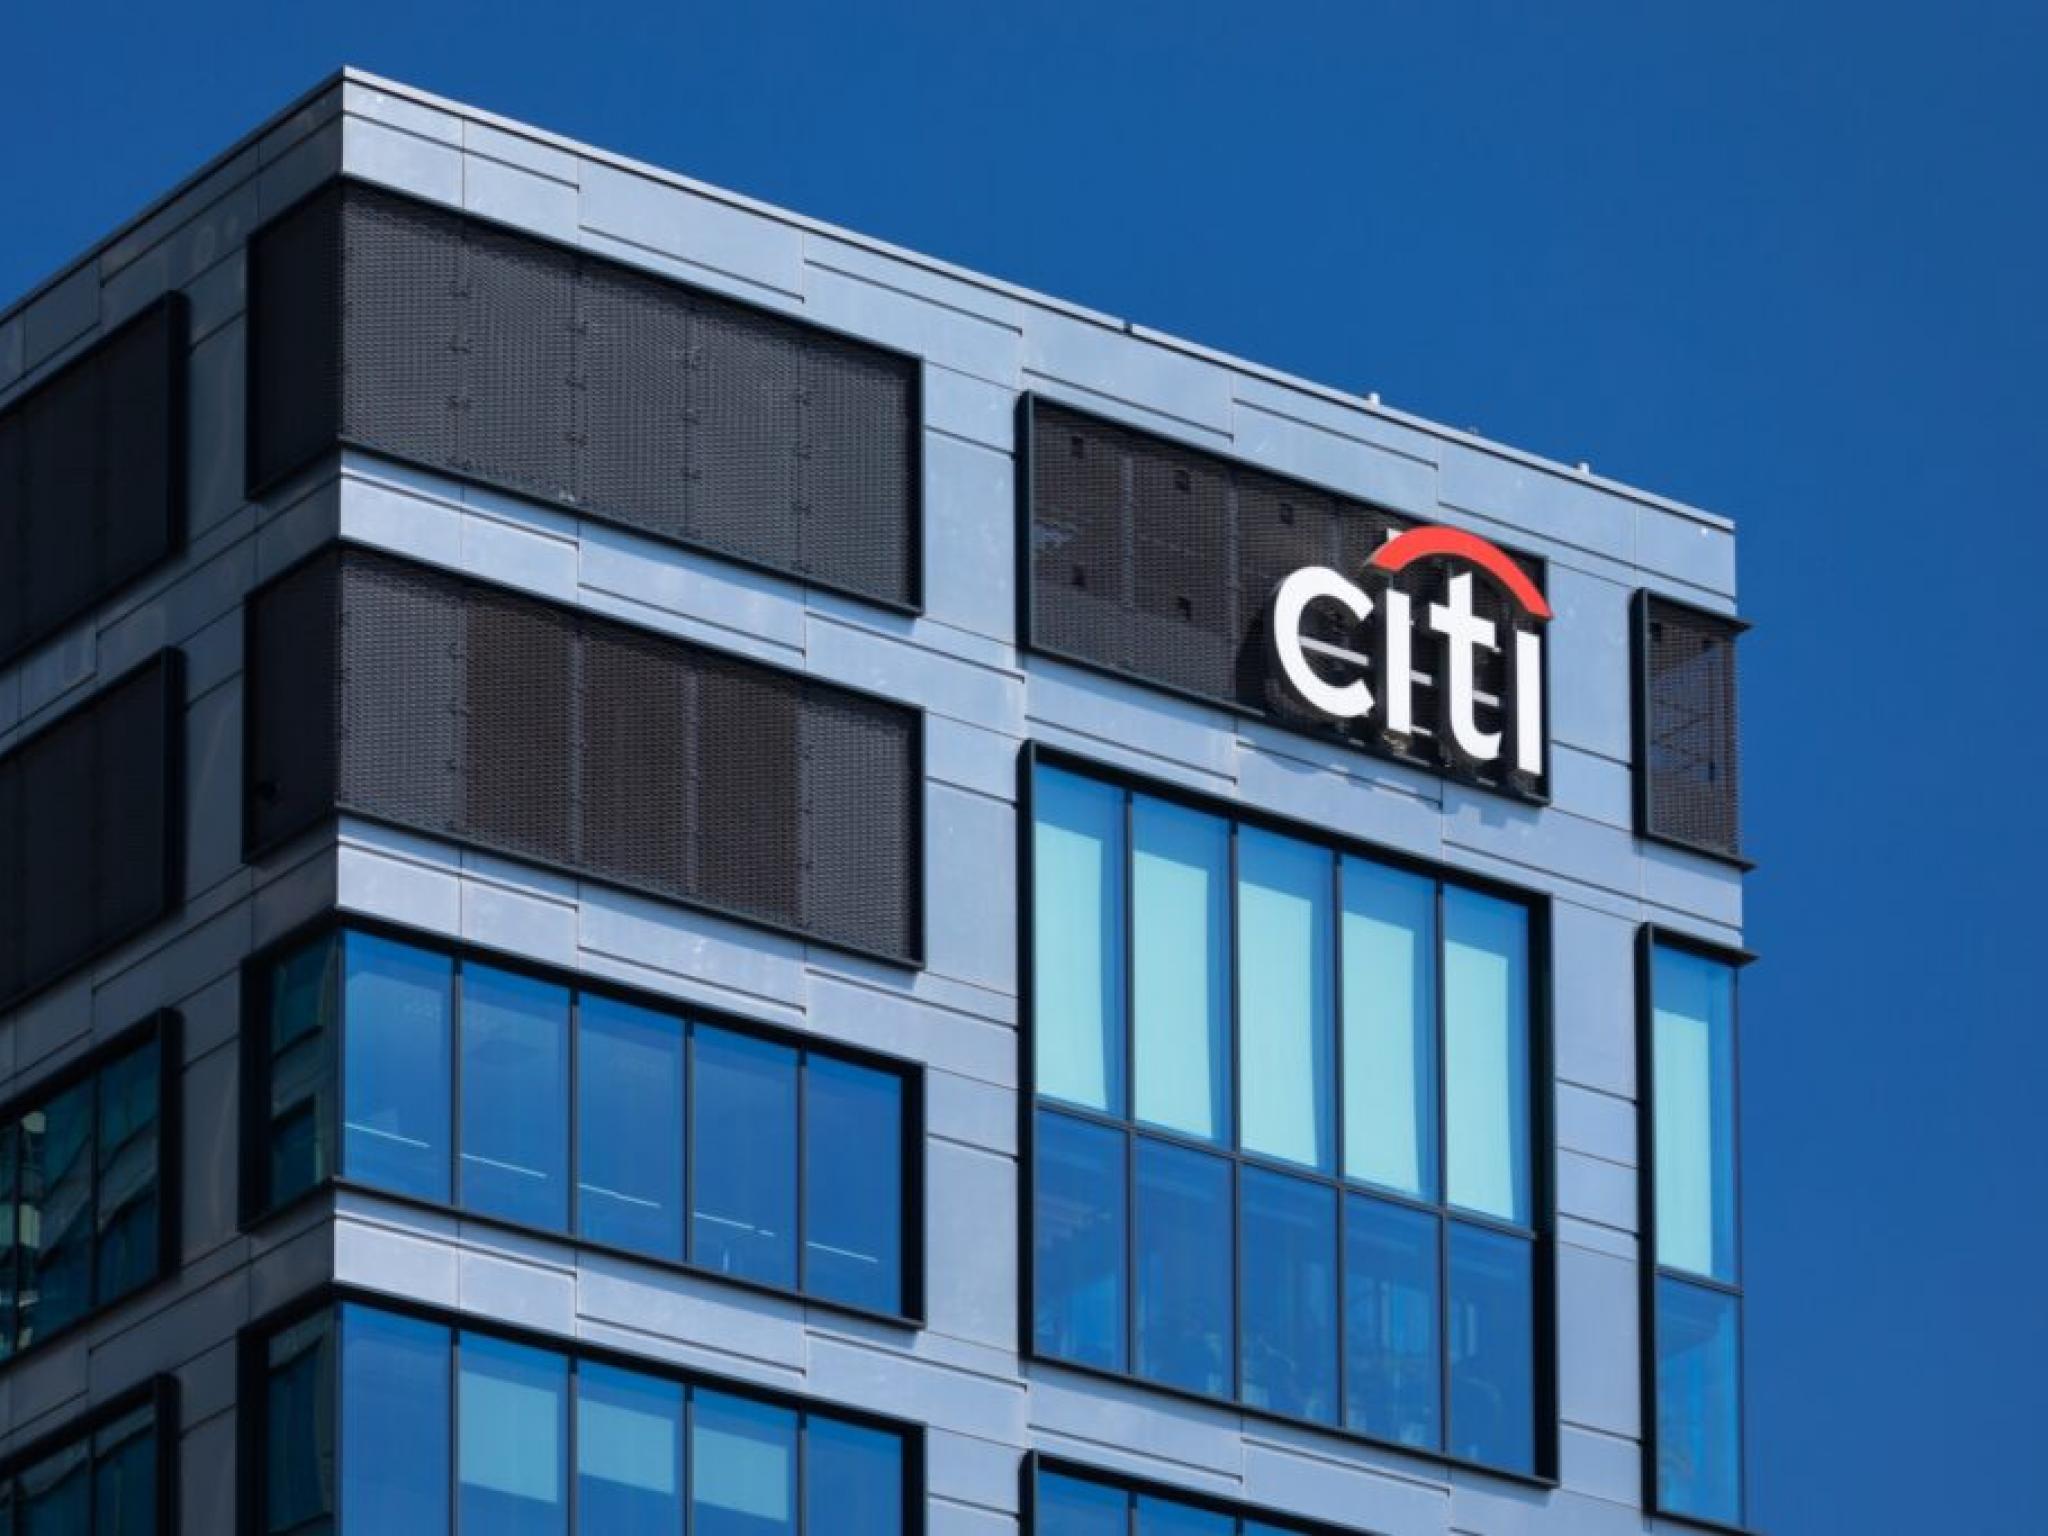  fed-penalizes-citigroup-136m-for-data-management-failures 